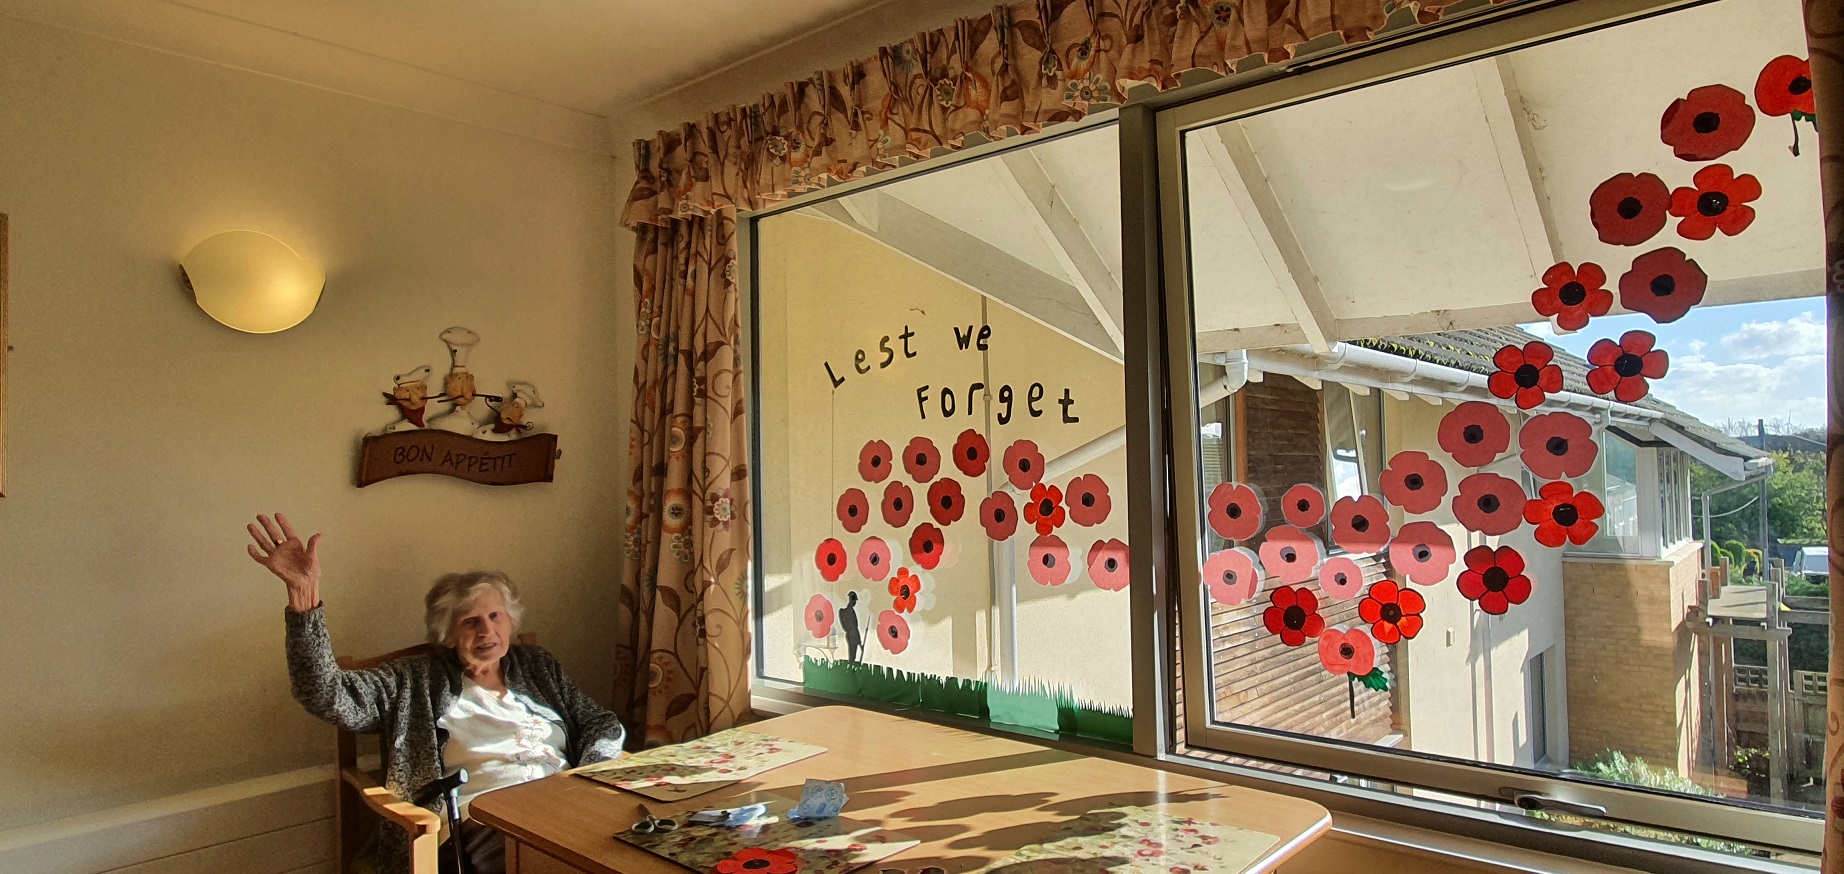 resident next to a window filled with poppy's saying 'Lest we forget'